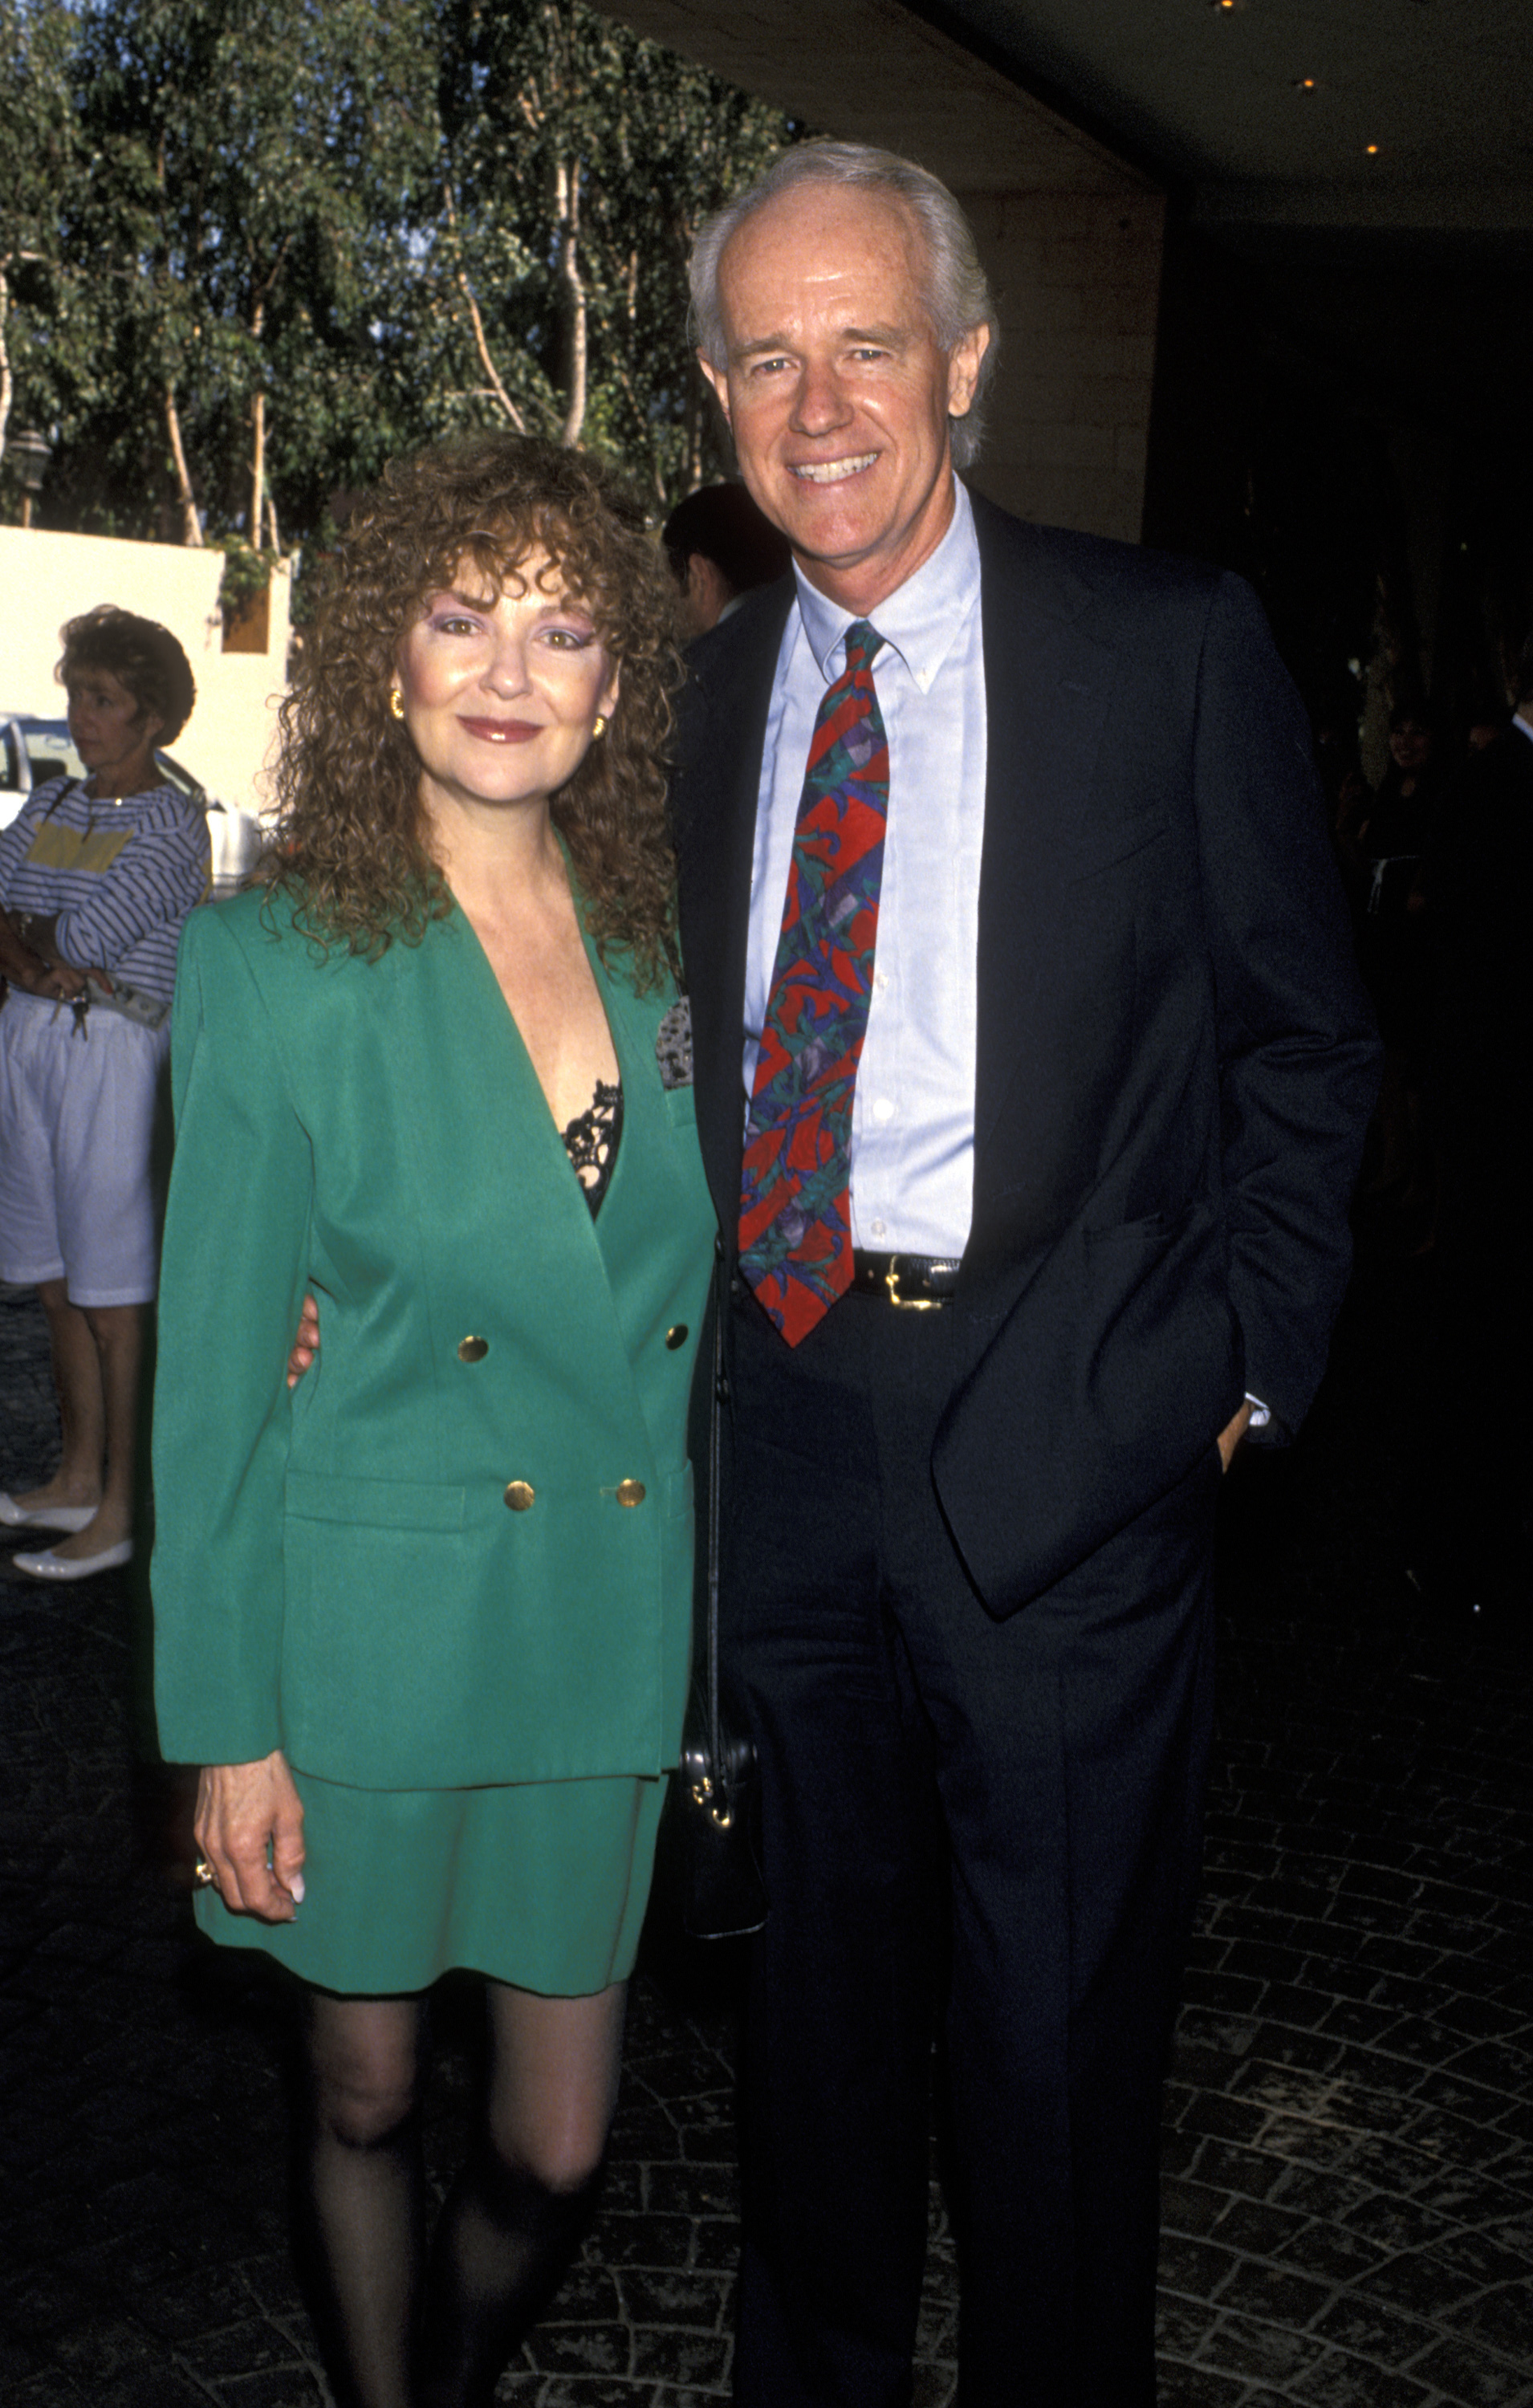 Shelley Fabares and Mike Farrell attend the "Women In Film Emmy Nominee Luncheon" at the Bel Age Hotel on September 10, 1994 in West Hollywood, California | Source: Getty Images